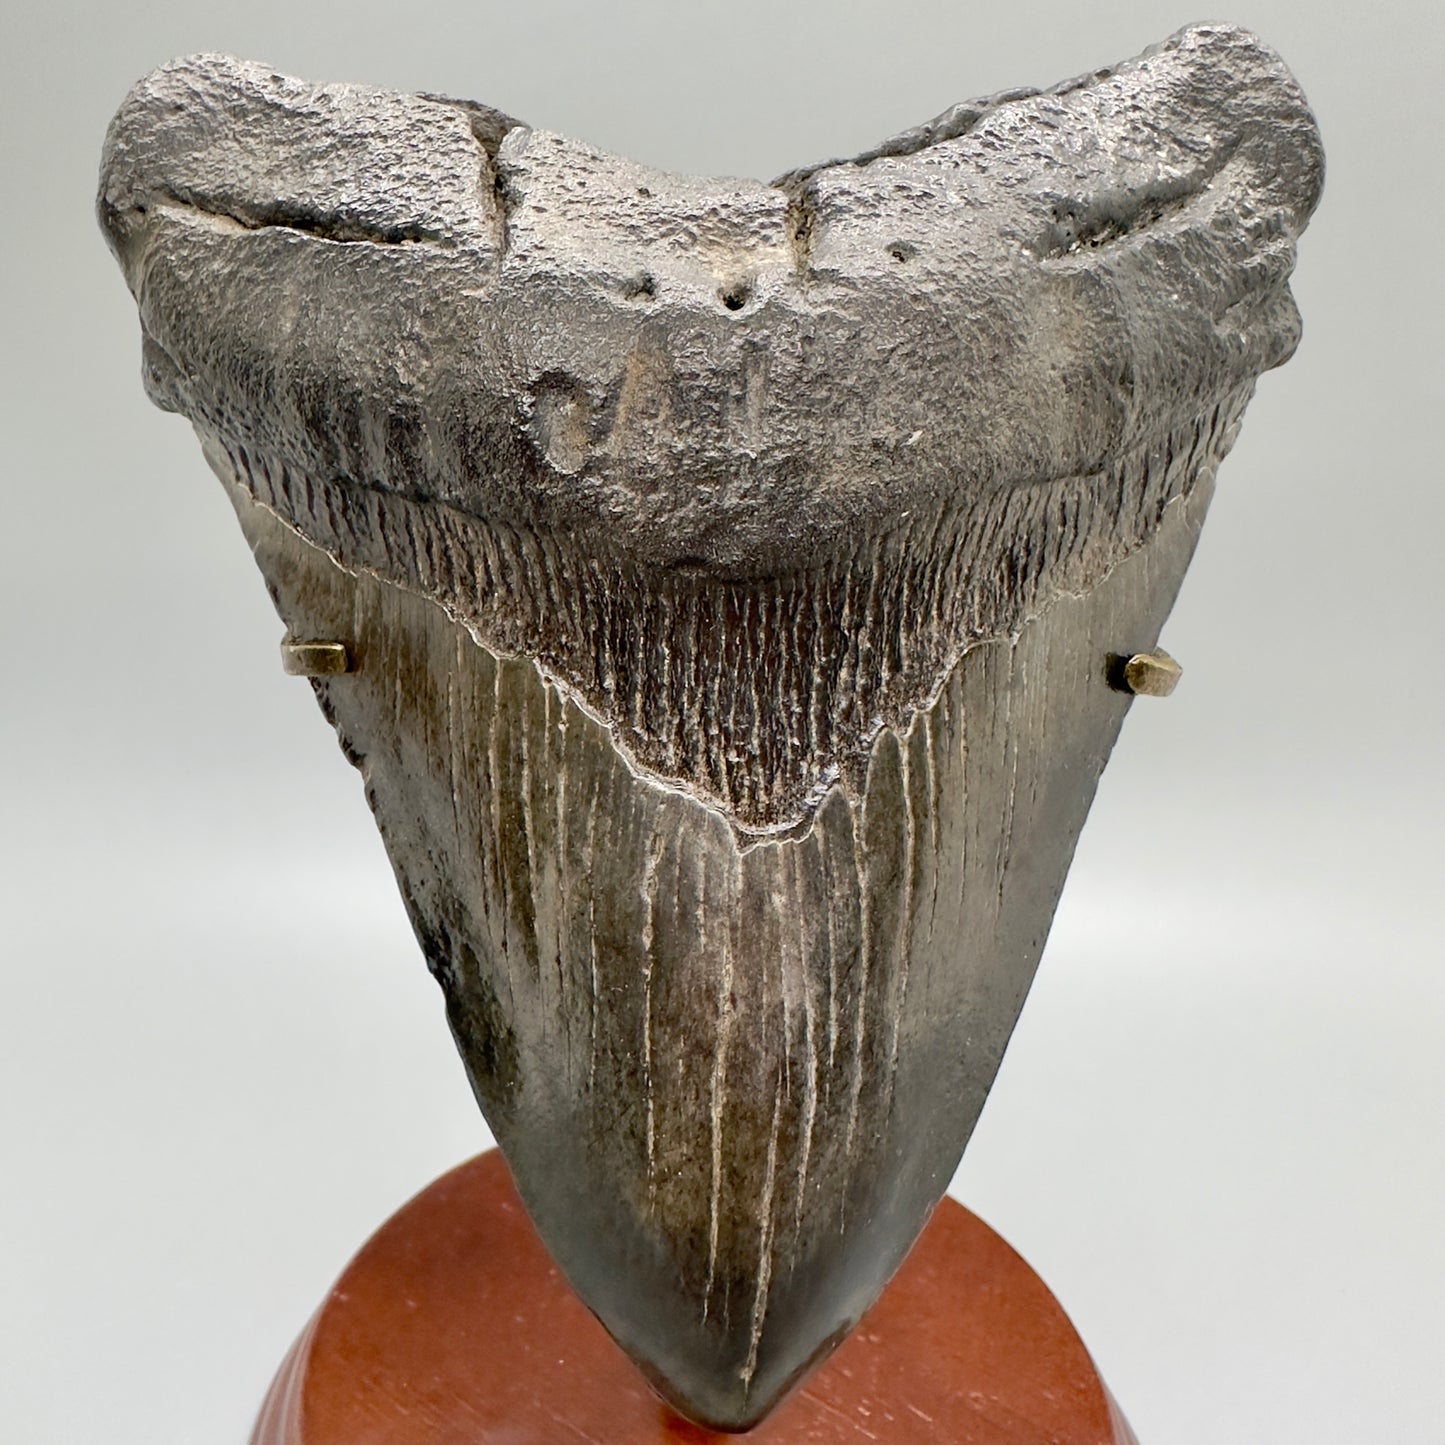 EXTRA LARGE 6.01" Fossil Megalodon Tooth: Scuba Diving, USA CM4698 - Front in stand